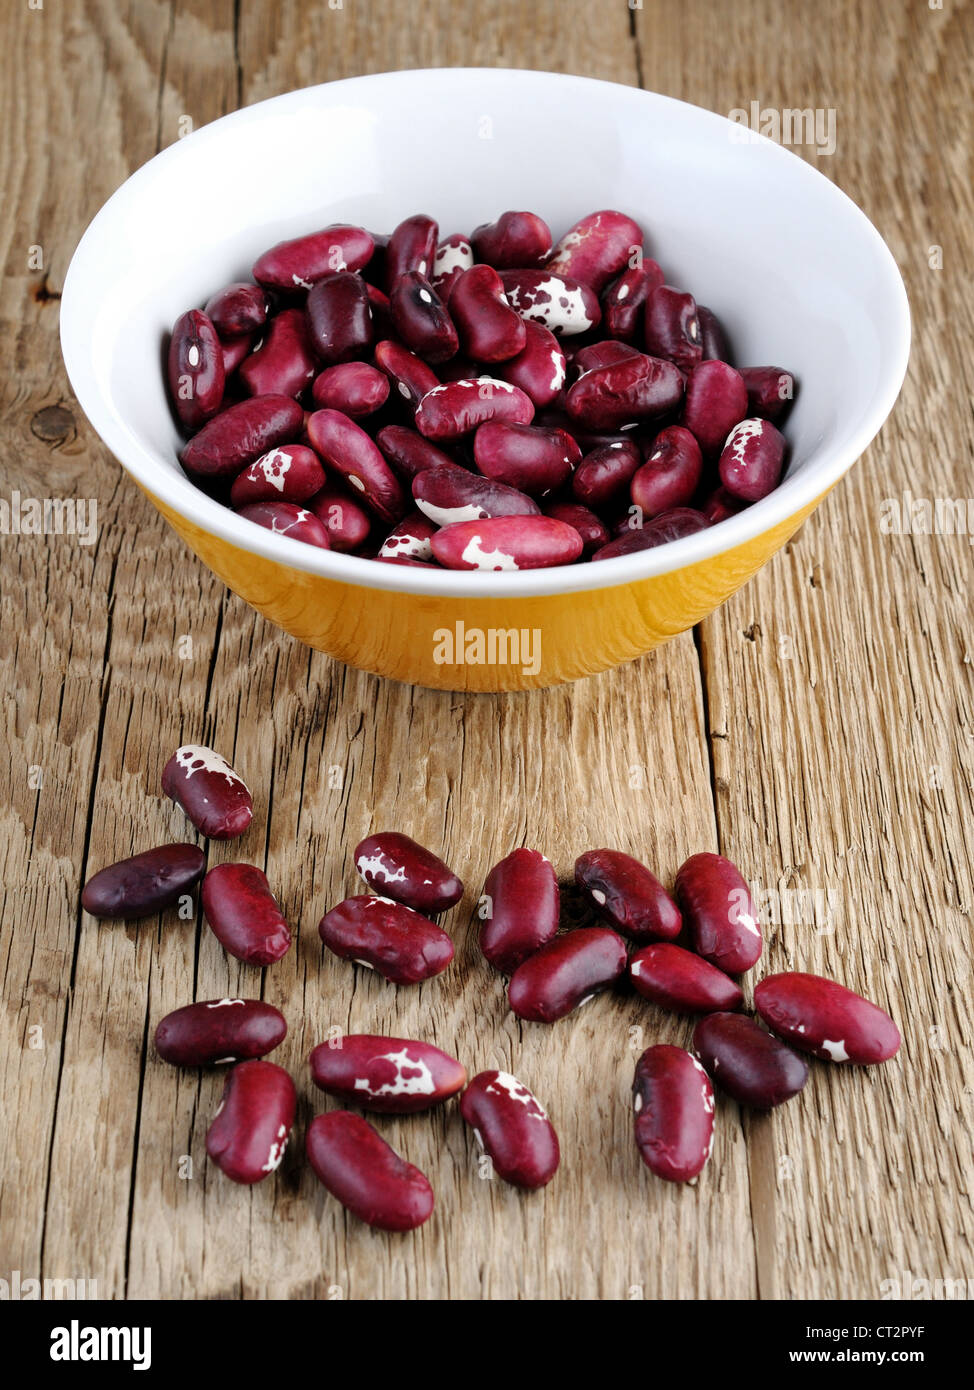 Beans in bowl on wooden background Stock Photo